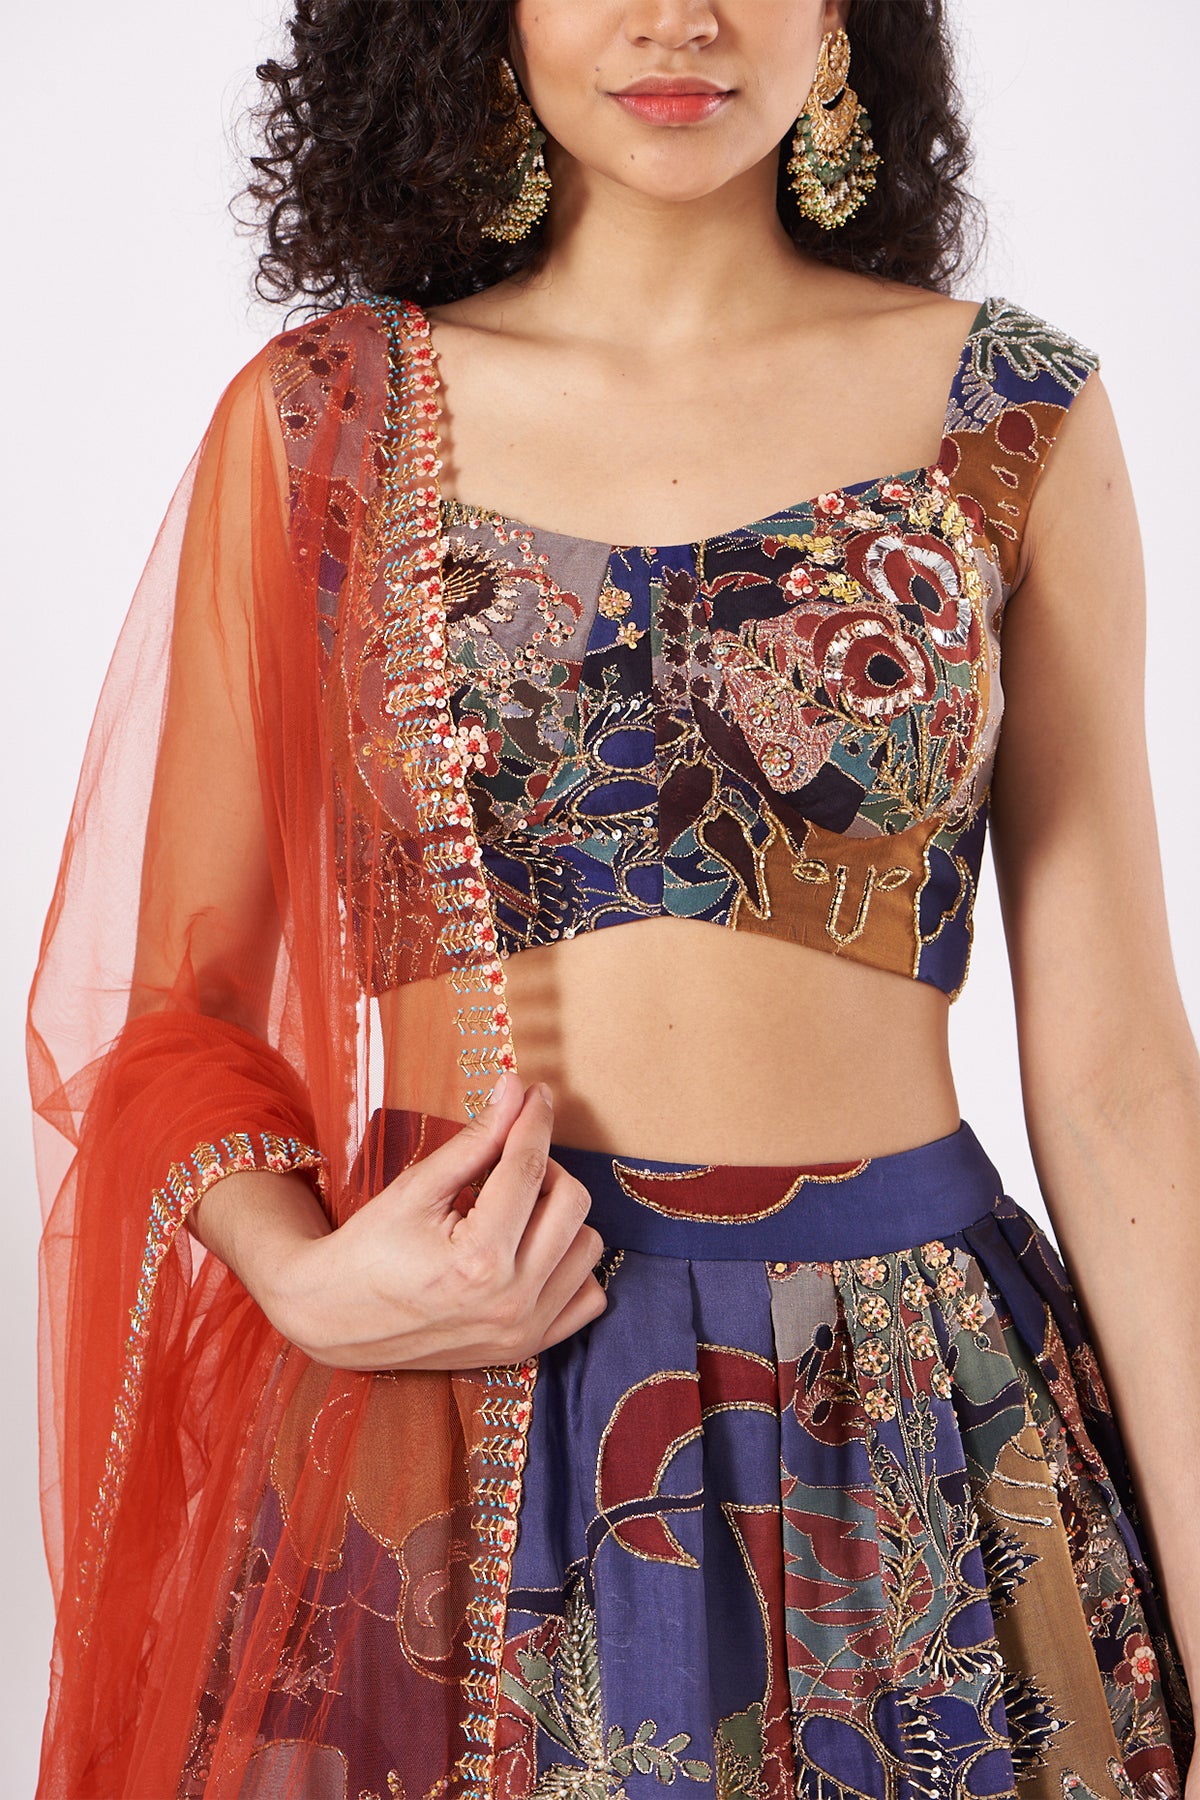 Blue Paper Dolls Organza Printed And Embellished Top And Skirt With Scallop Dupatta